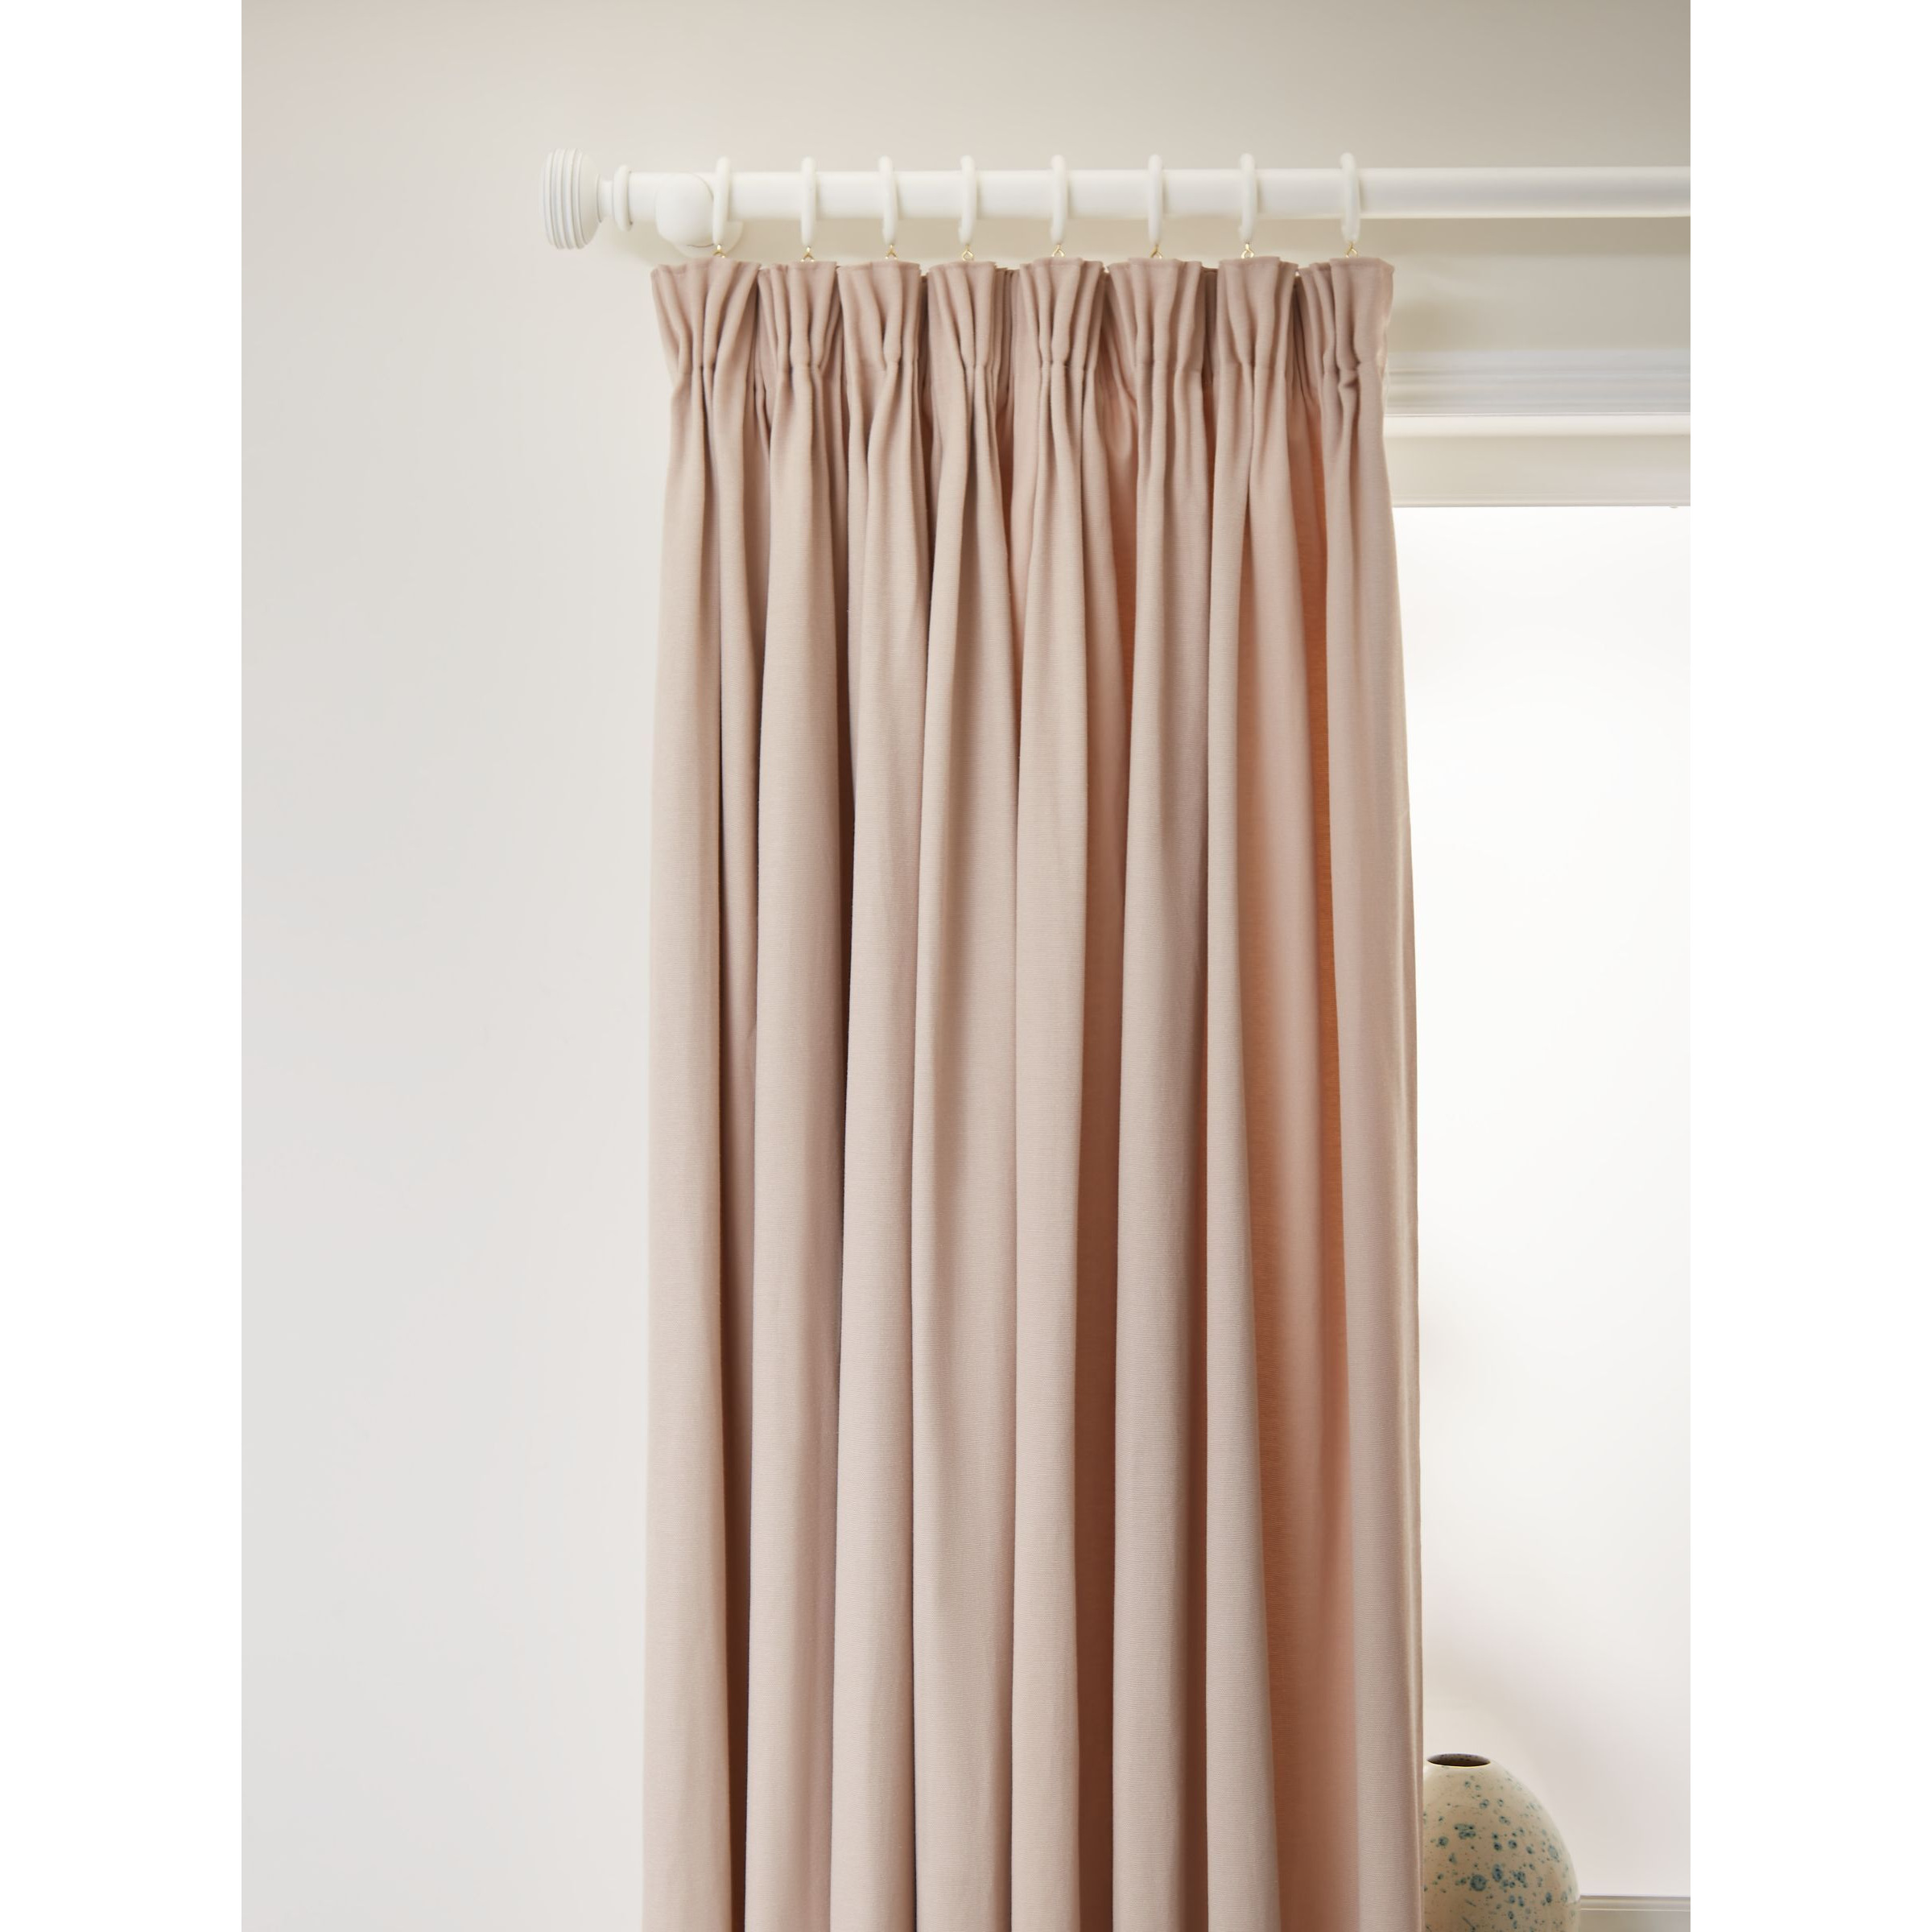 John Lewis ANYDAY Arlo Pair Lined Pencil Pleat Curtains - image 1